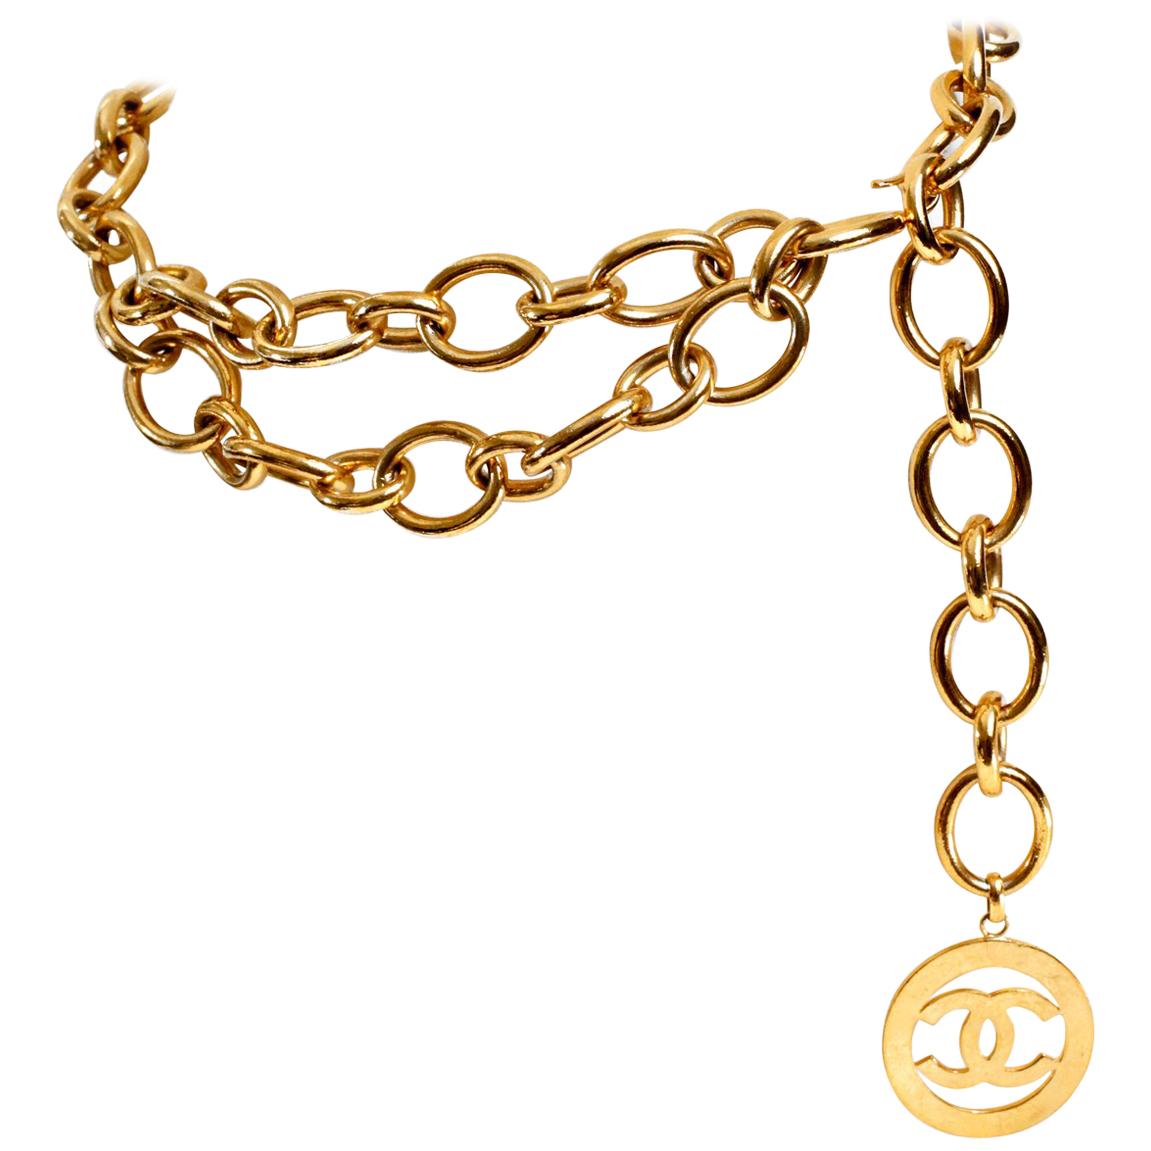 Chanel Gold Link Chain Belt with CC Charm